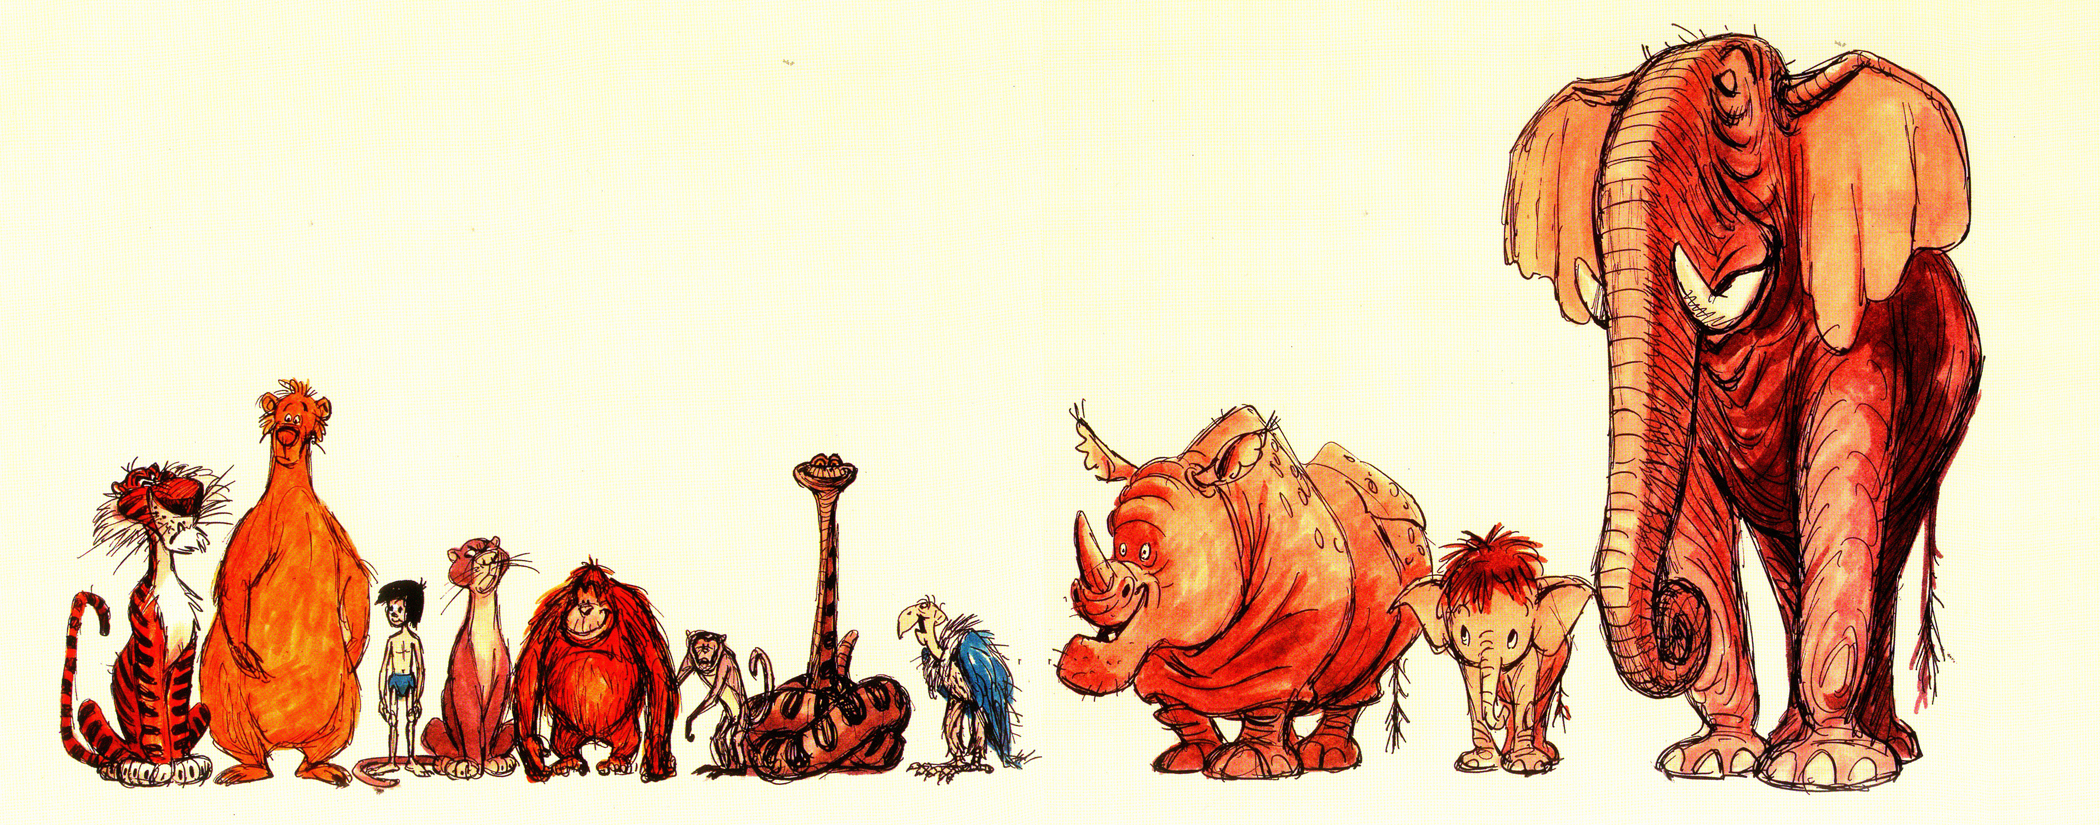 The Art Of Animation Disney Concept Jungle Book